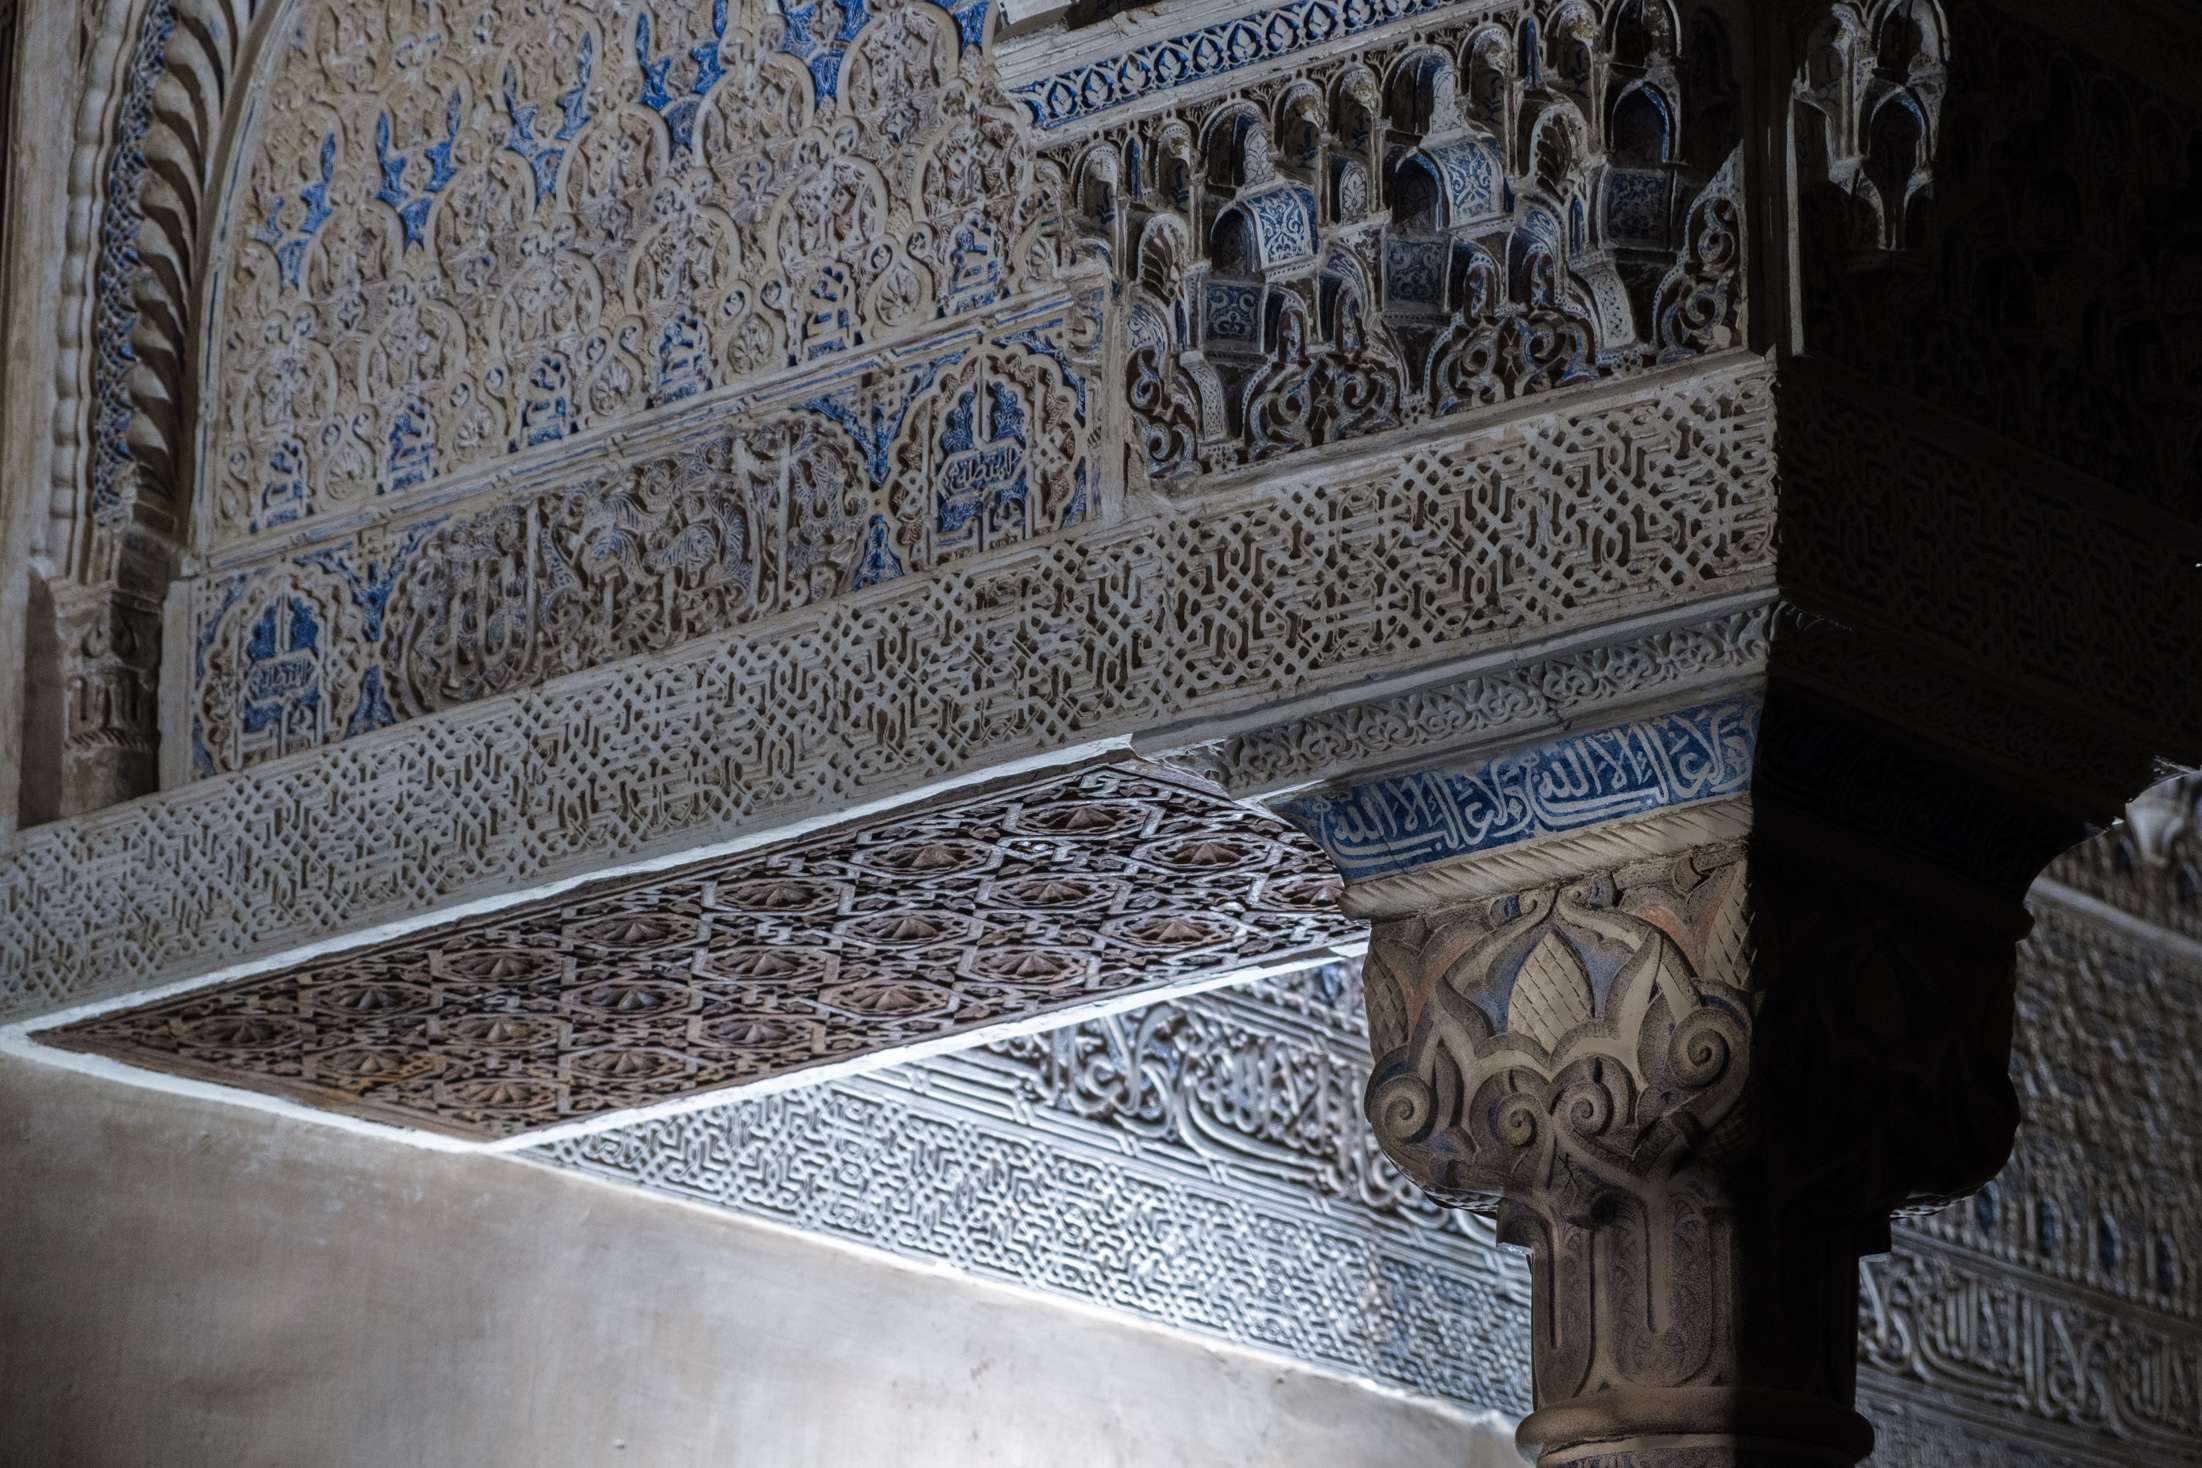 Intricately details, The Alhambra, Granada